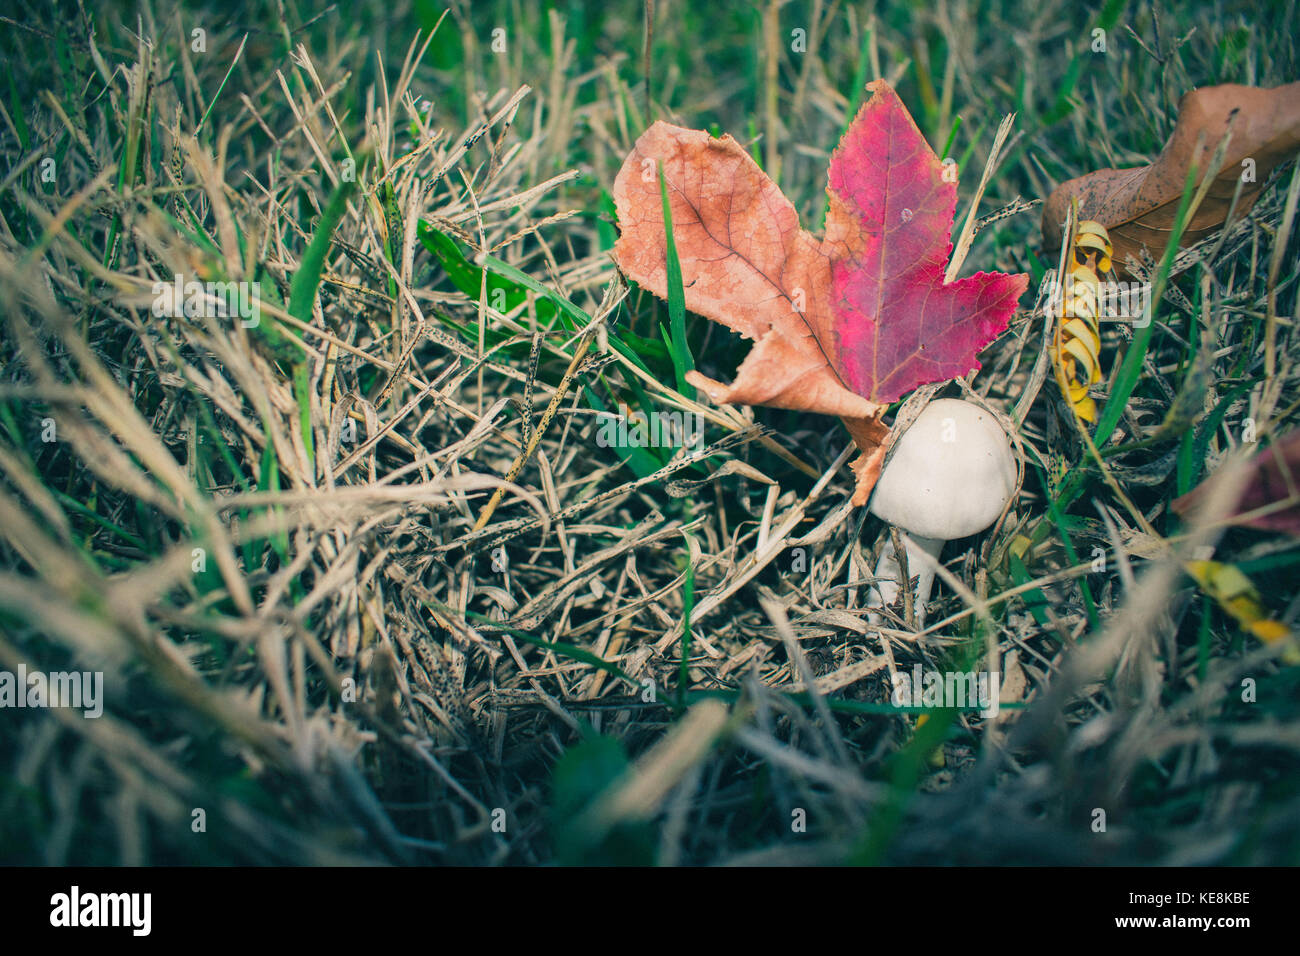 Abstract Mushroom And Autumn Leaves In The Grass, Fall Stock Photo